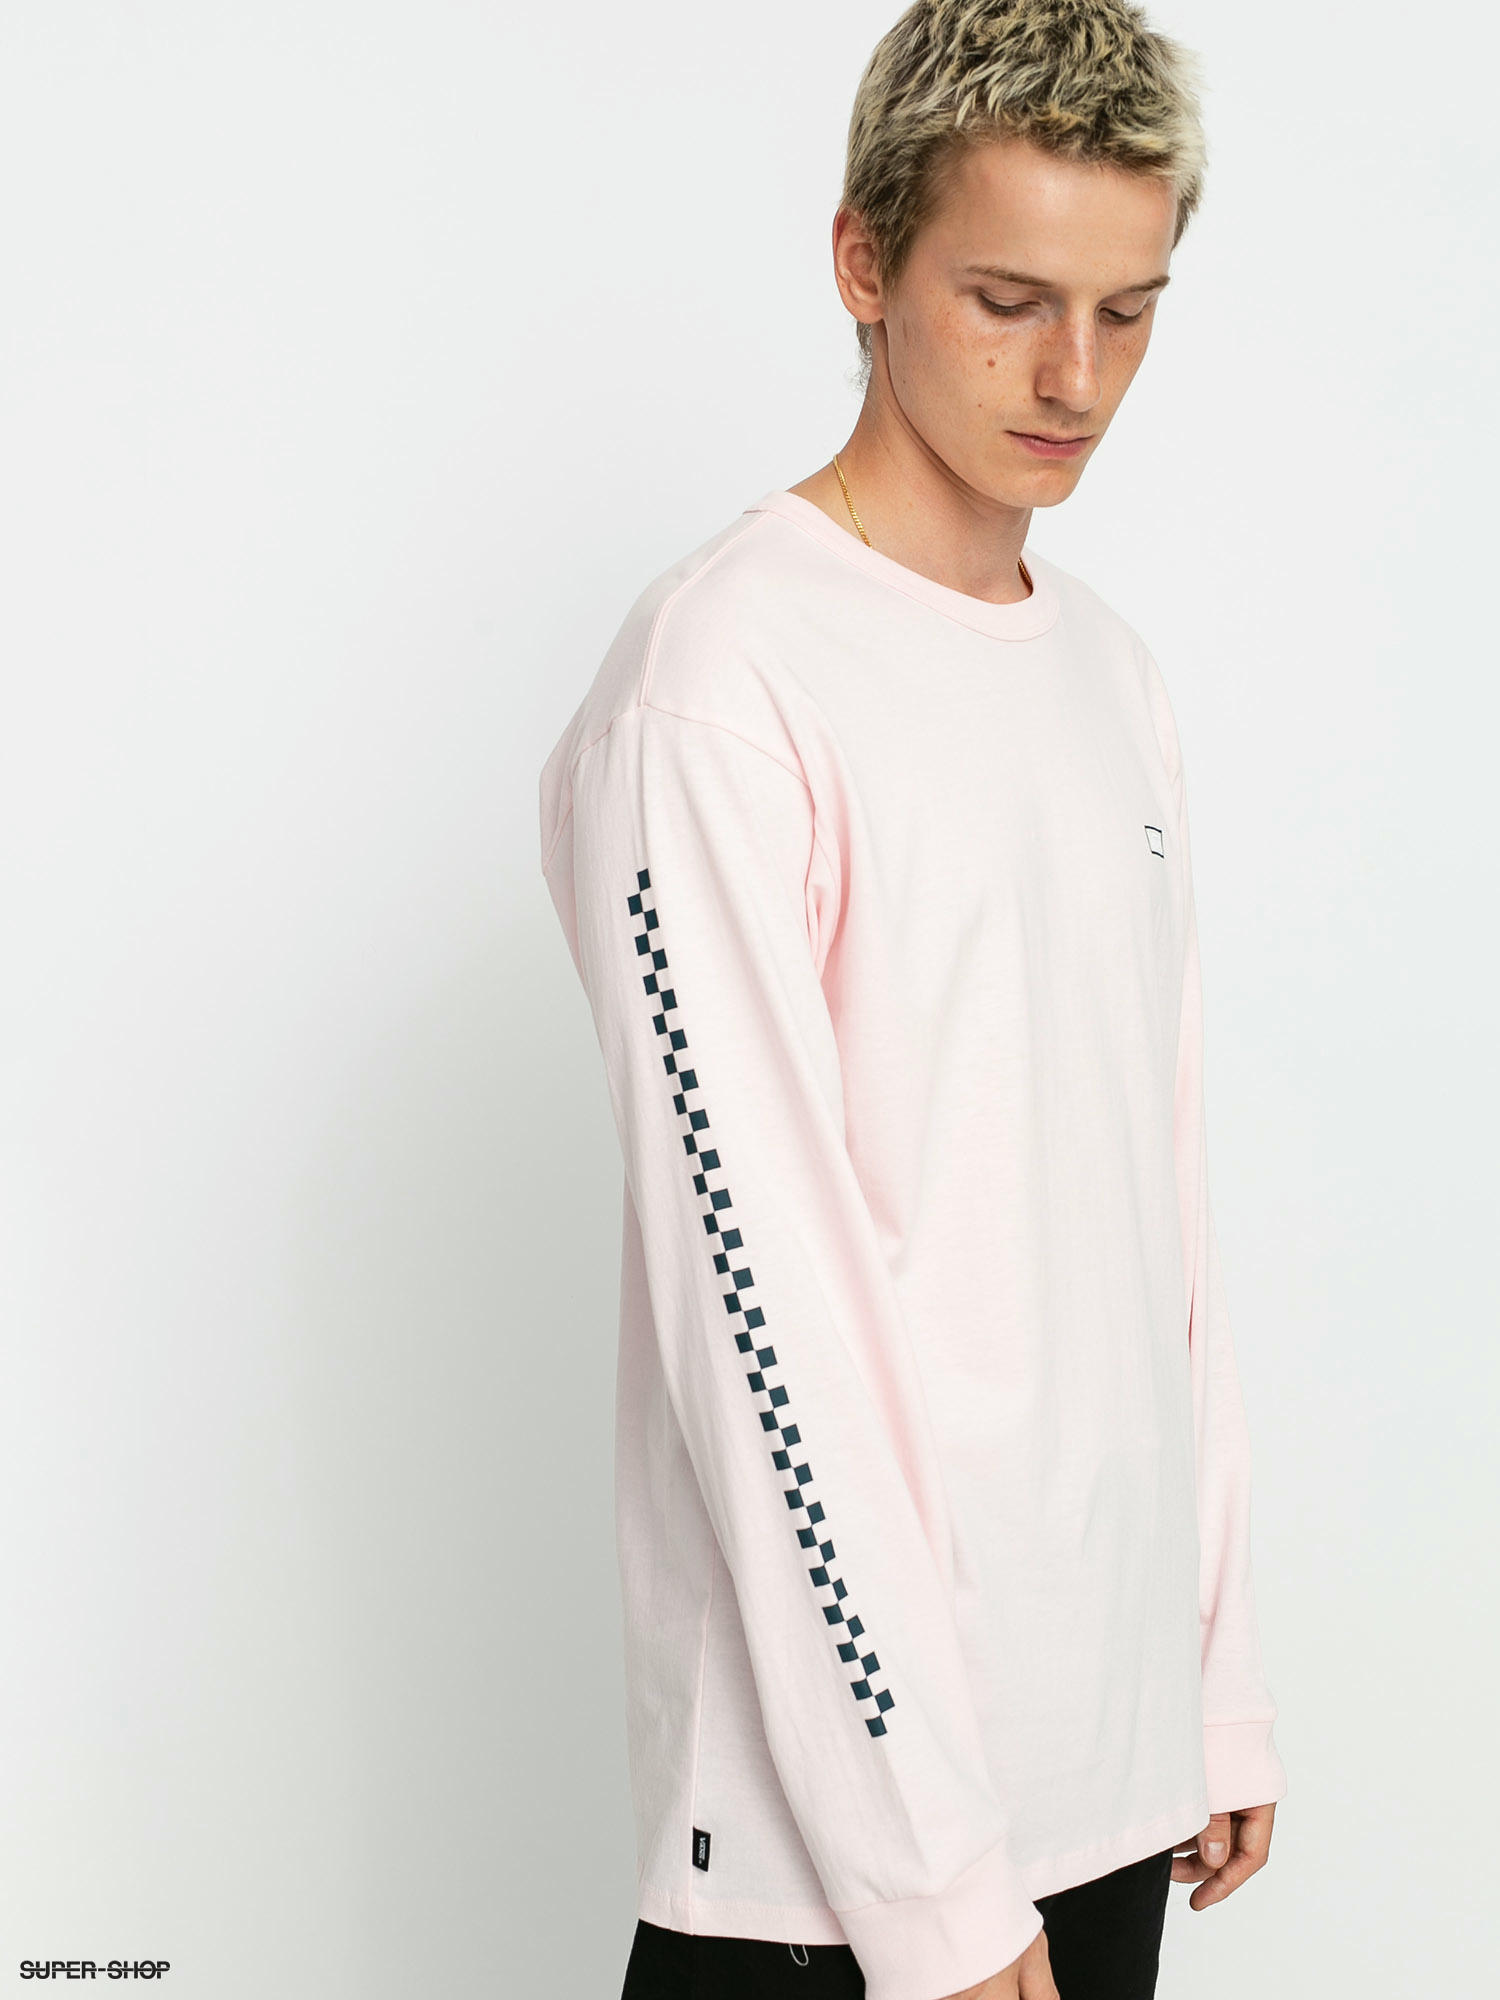 Vans Off The Wall Classic Longsleeve (cool pink)